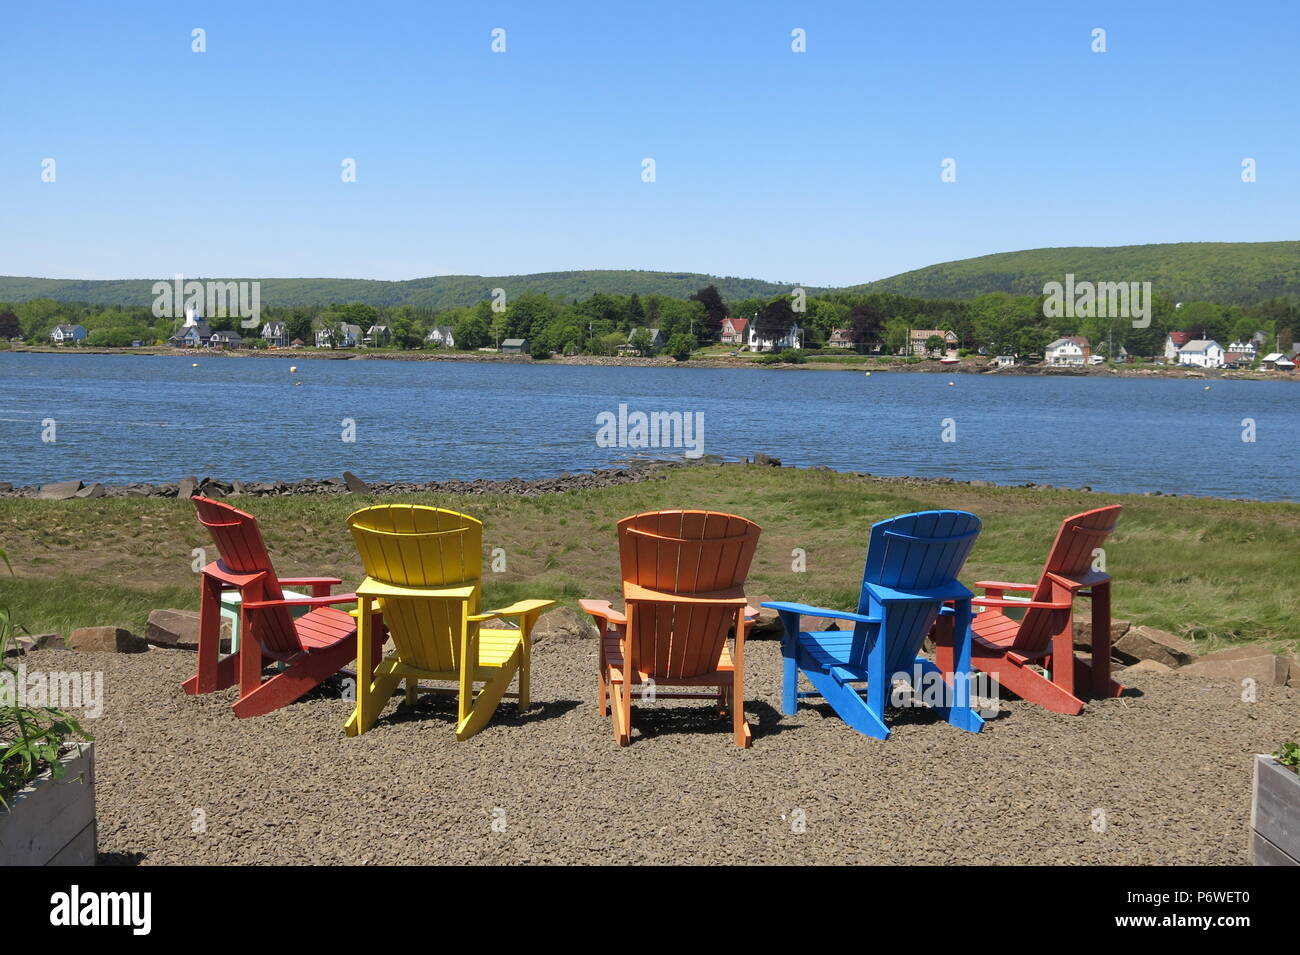 A Row Of Brightly Coloured Adirondack Chairs To Relax And Admire